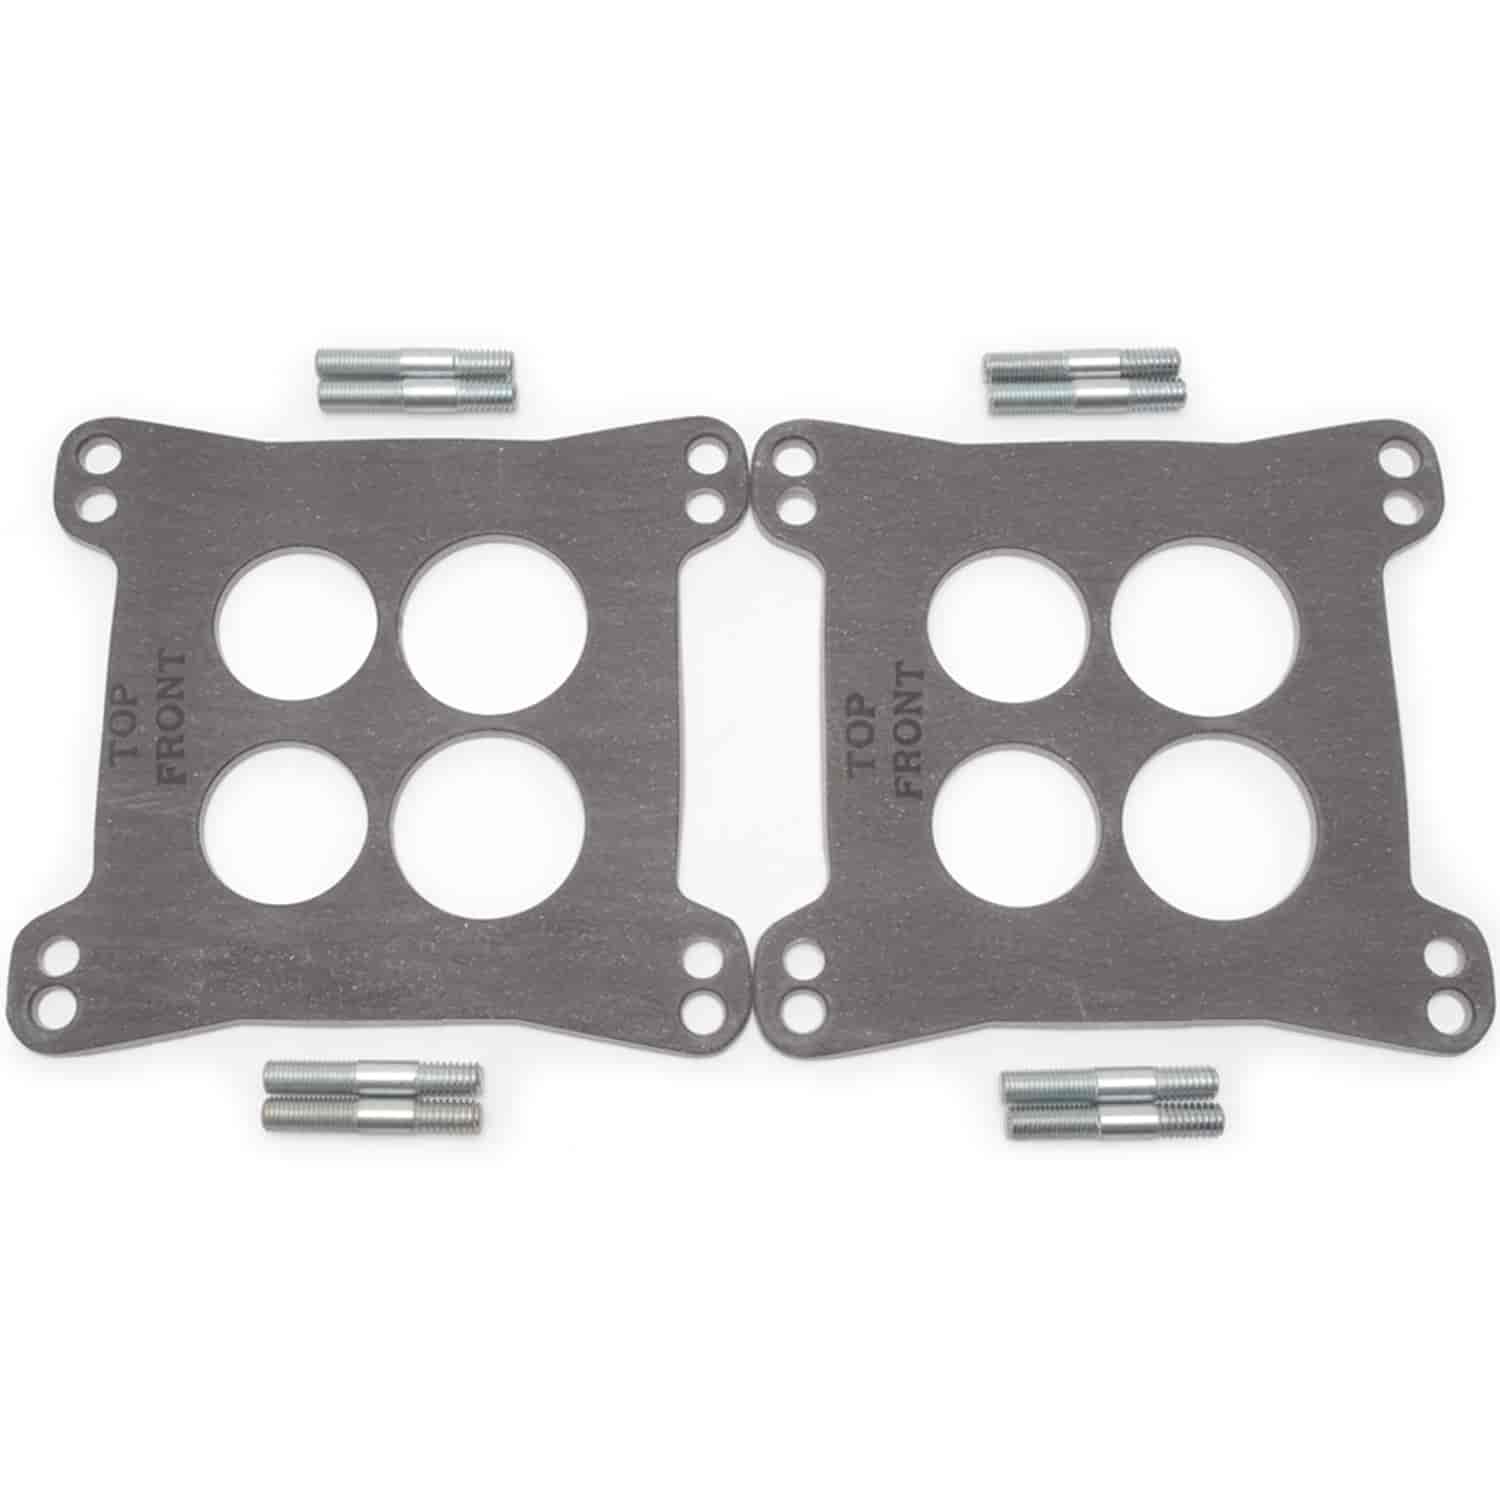 Heat Insulator Gaskets Divided Square-bore for Dual-Quad Manifolds